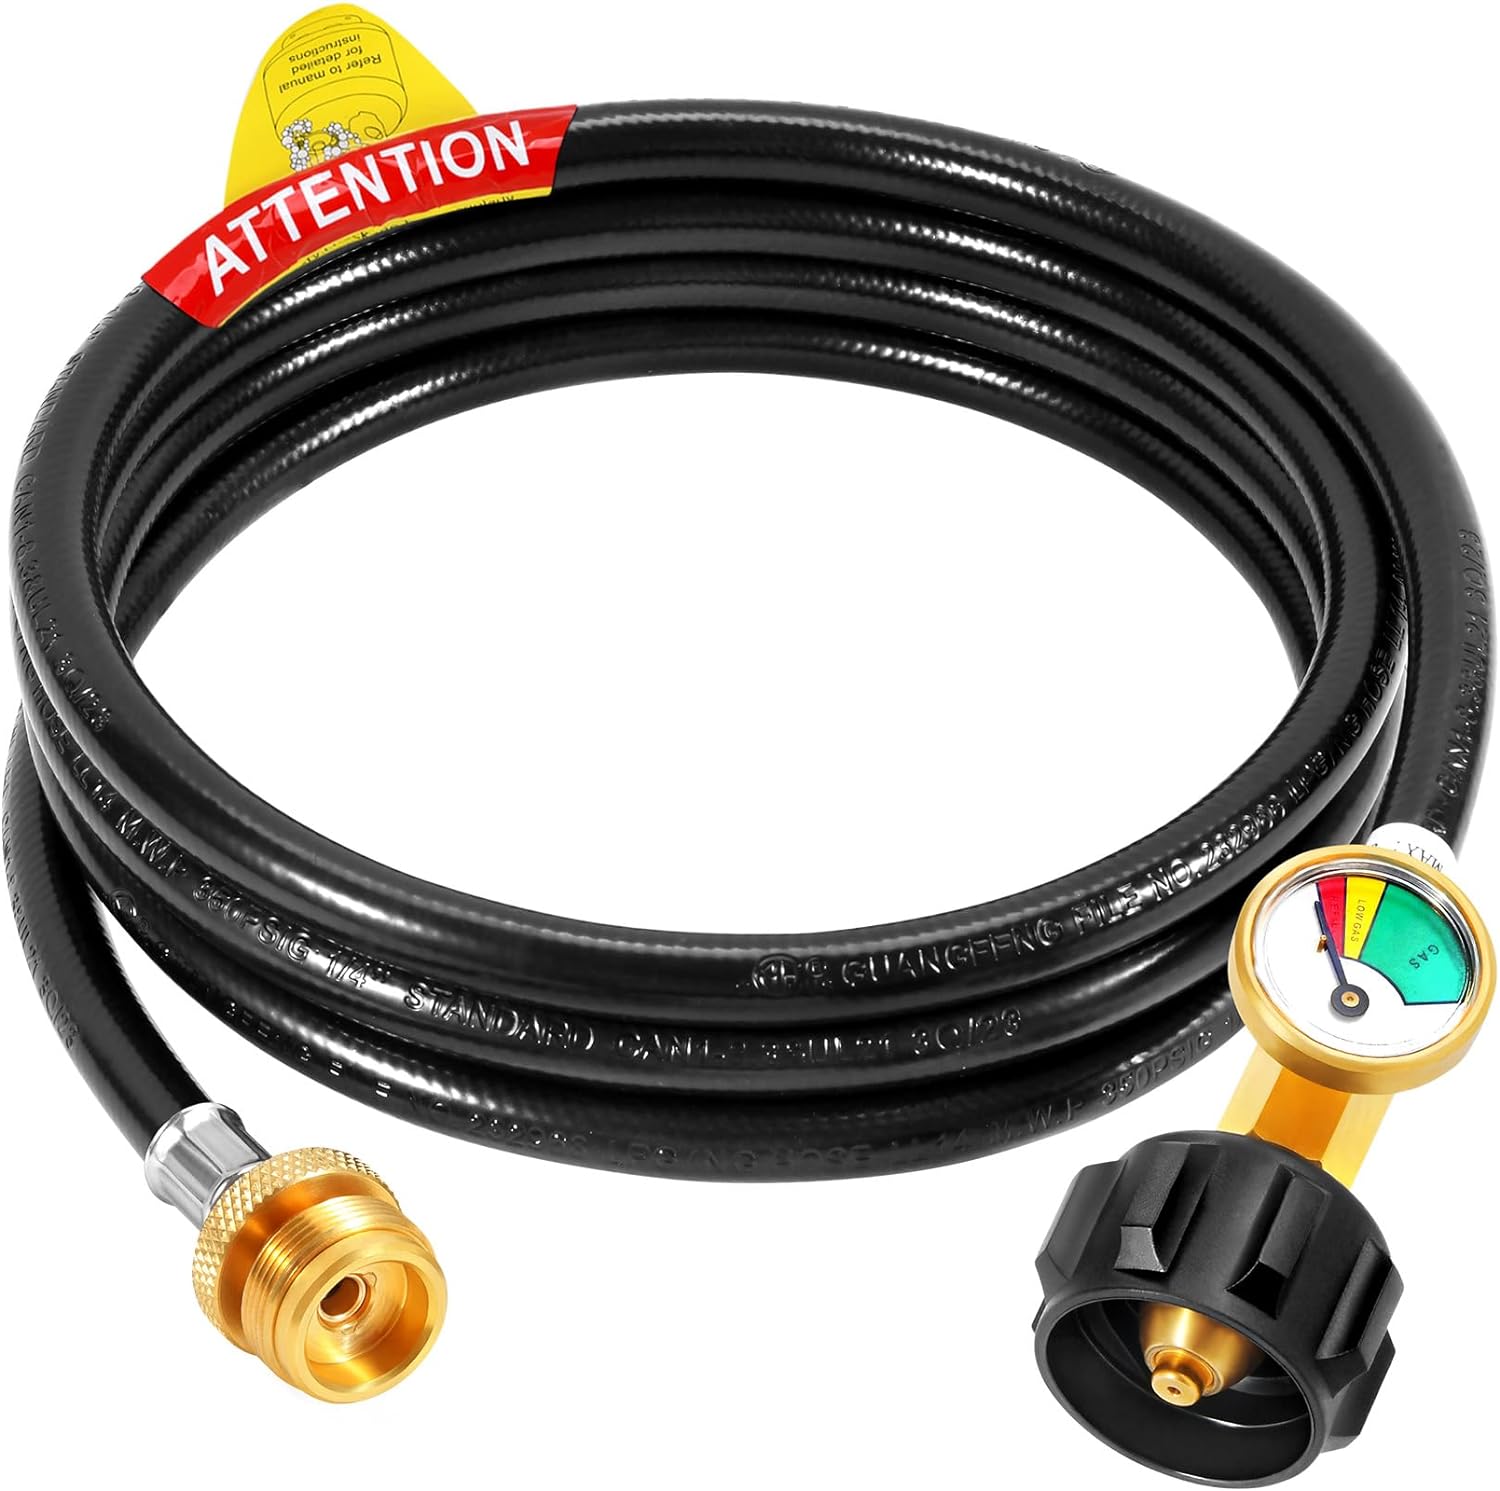 GasSaf 8FT Propane Hose Propane Adapter Hose 1lb to 20lb Connection Review